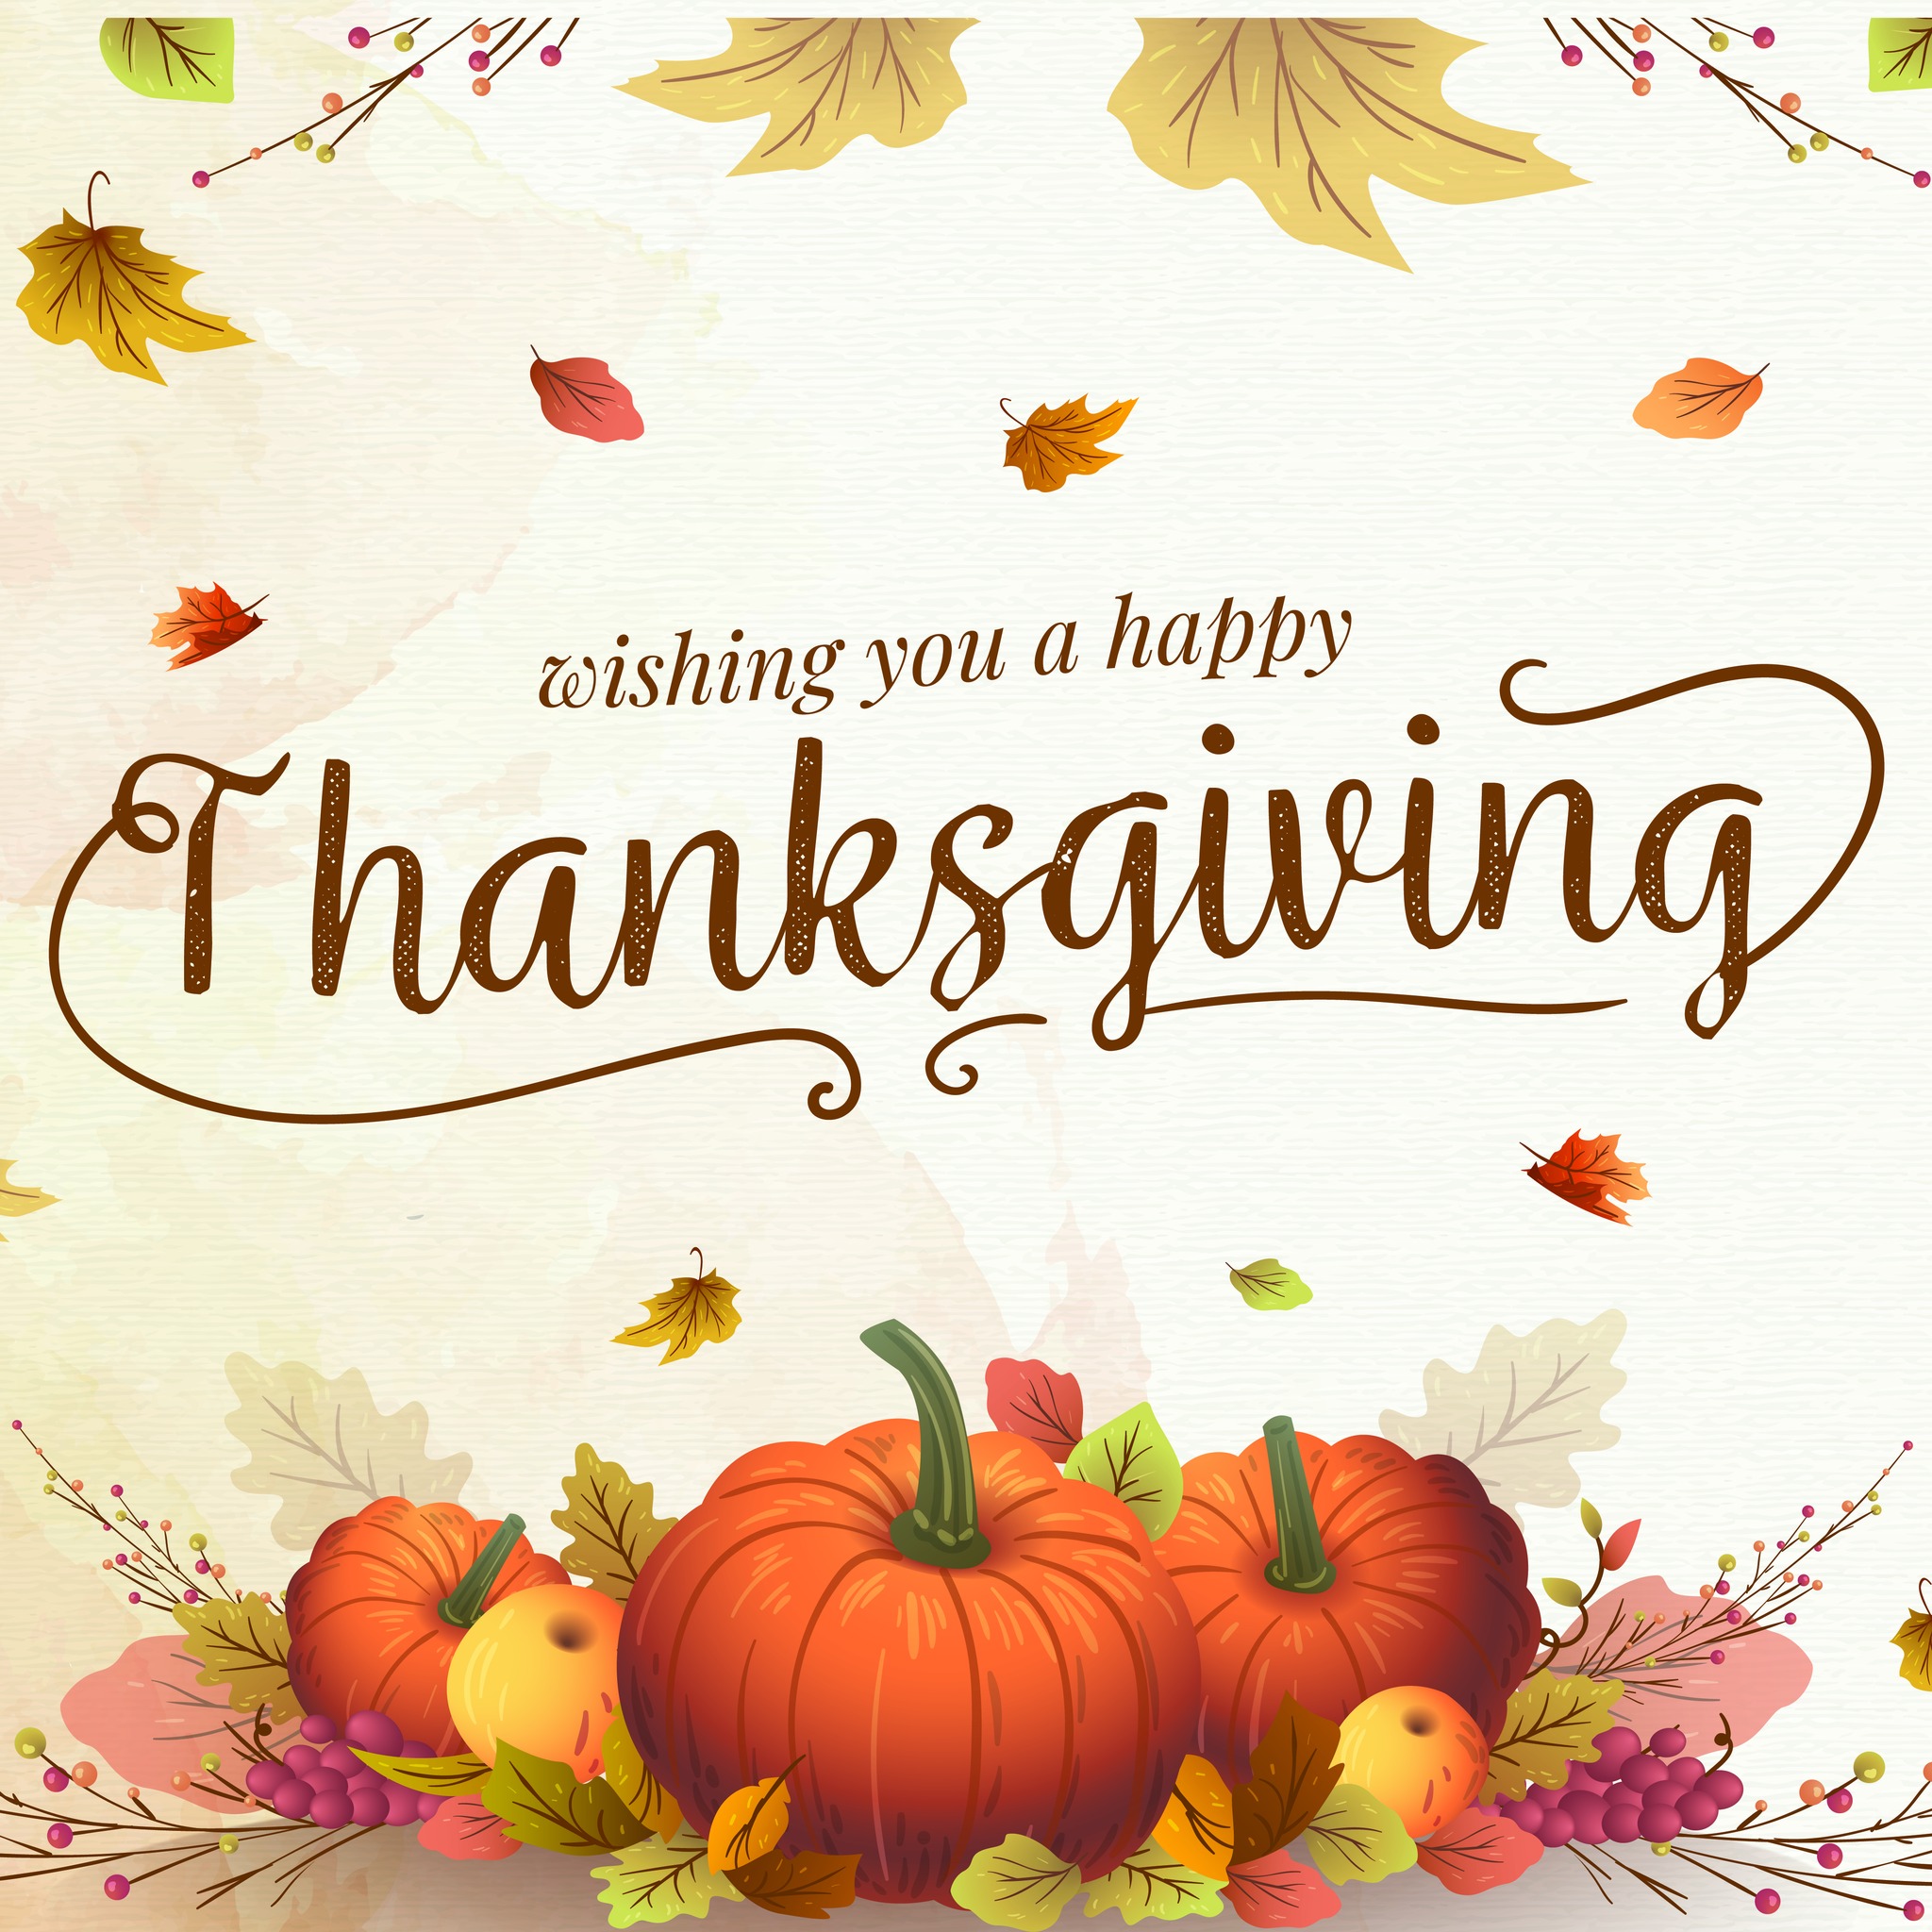 We here at Stickers and More want to wish everyone a Happy Thanksgiving. May this day remind you of all the things we have to be thankful for. In observation of the holiday we will be closed Thursday, November 24 to Monday, November 28. Again Happy Thanksgiving.
#Thanksgiving #holiday